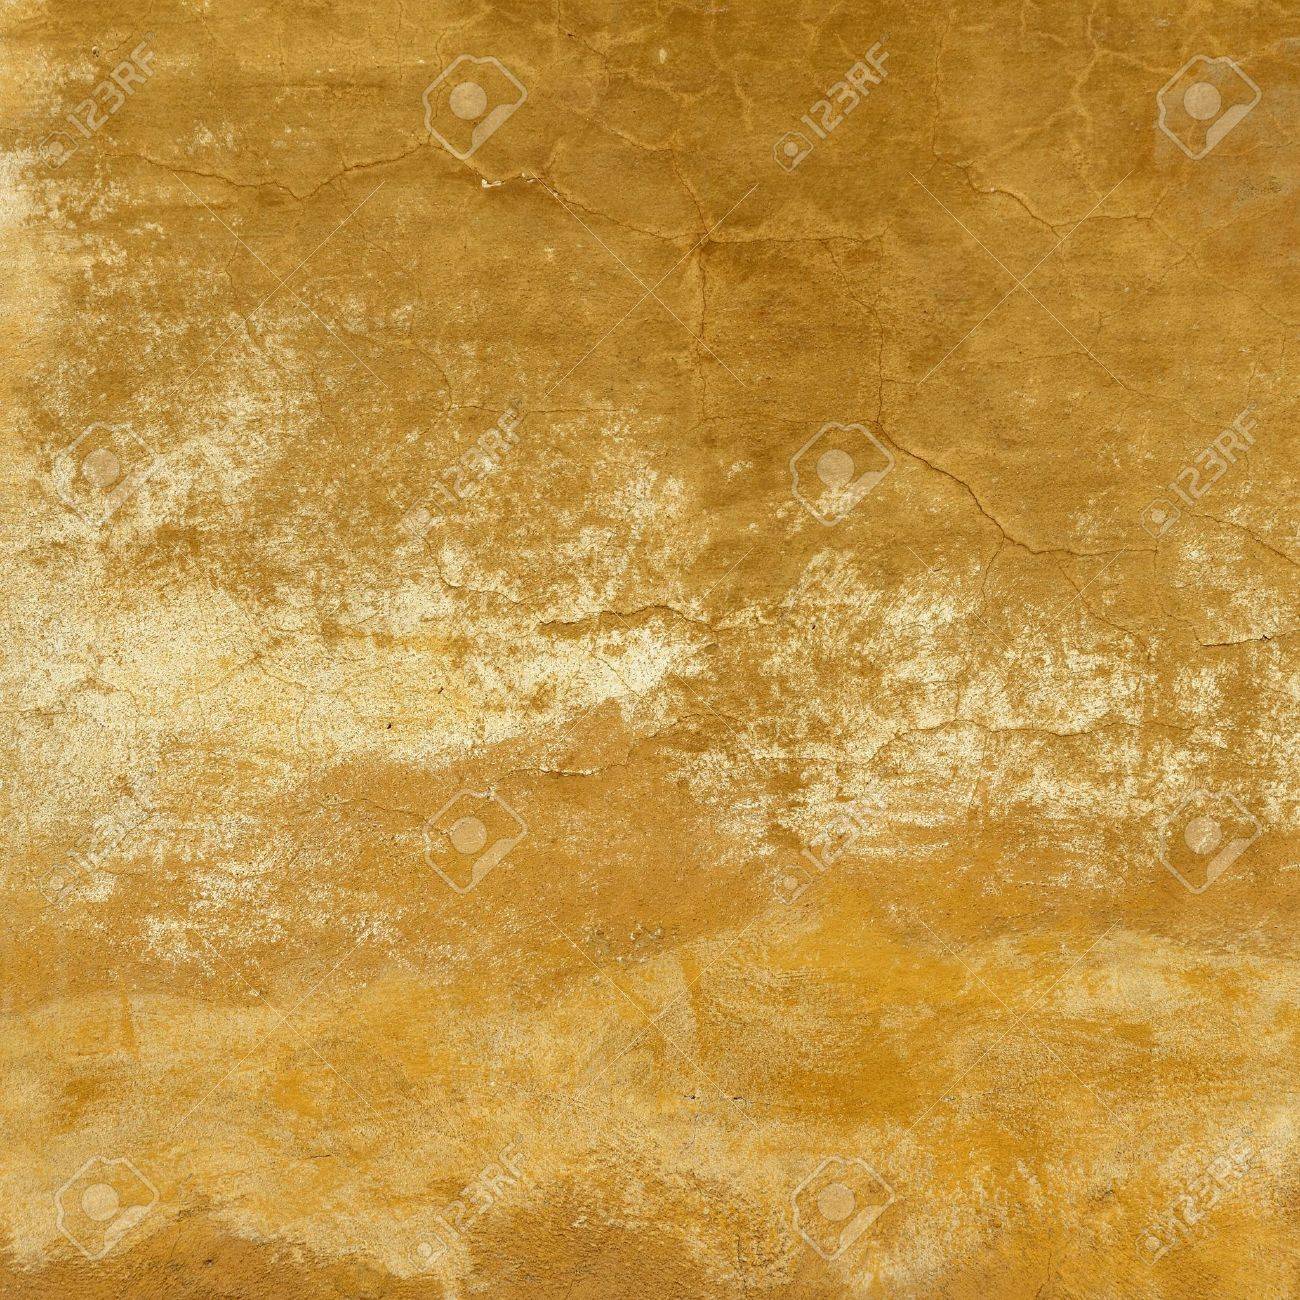 Tuscan Stucco Background Stock Photo Picture And Royalty